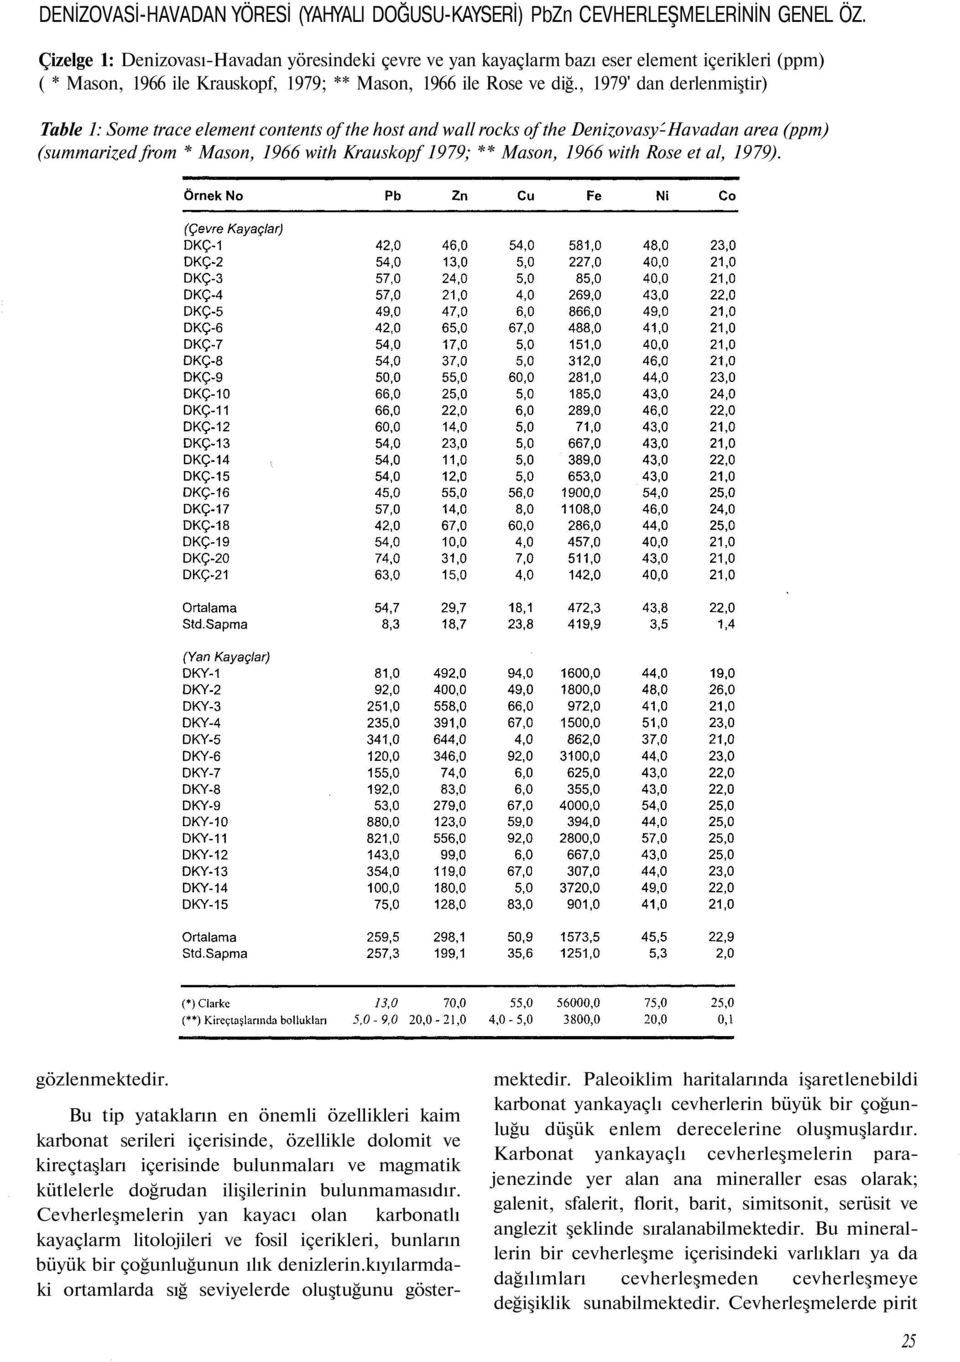 , 1979' dan derlenmiştir) Table 1: Some trace element contents of the host and wall rocks of the Denizovasy-Havadan area (ppm) (summarized from * Mason, 1966 with Krauskopf 1979; ** Mason, 1966 with